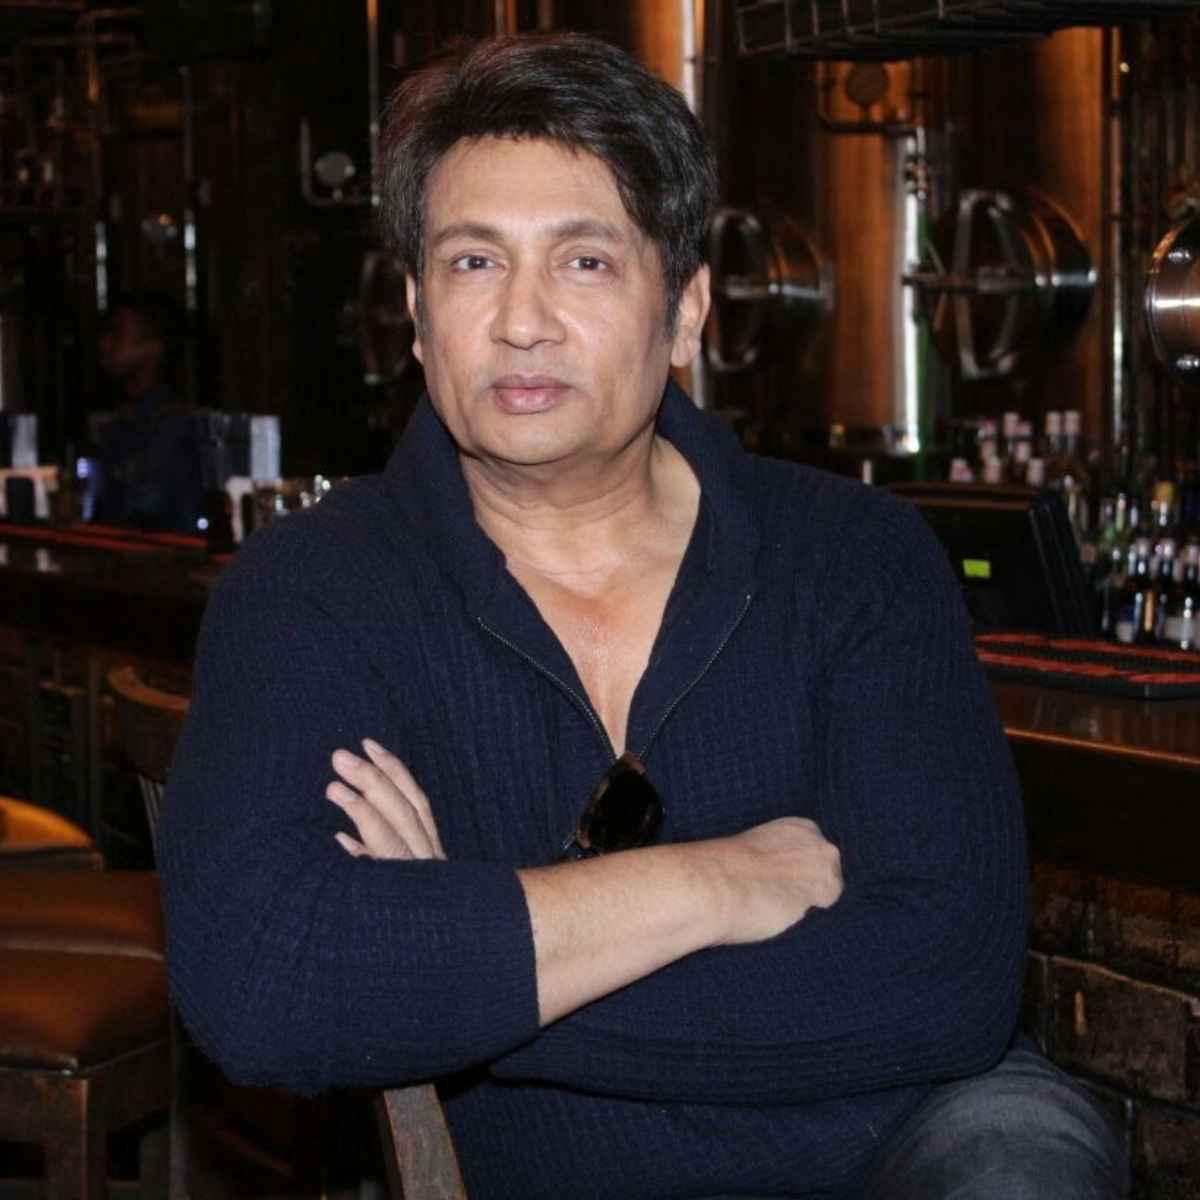 EXCLUSIVE: Shekhar Suman on not liking being called TV’s Amitabh Bachchan initially: Realised how stupid I was